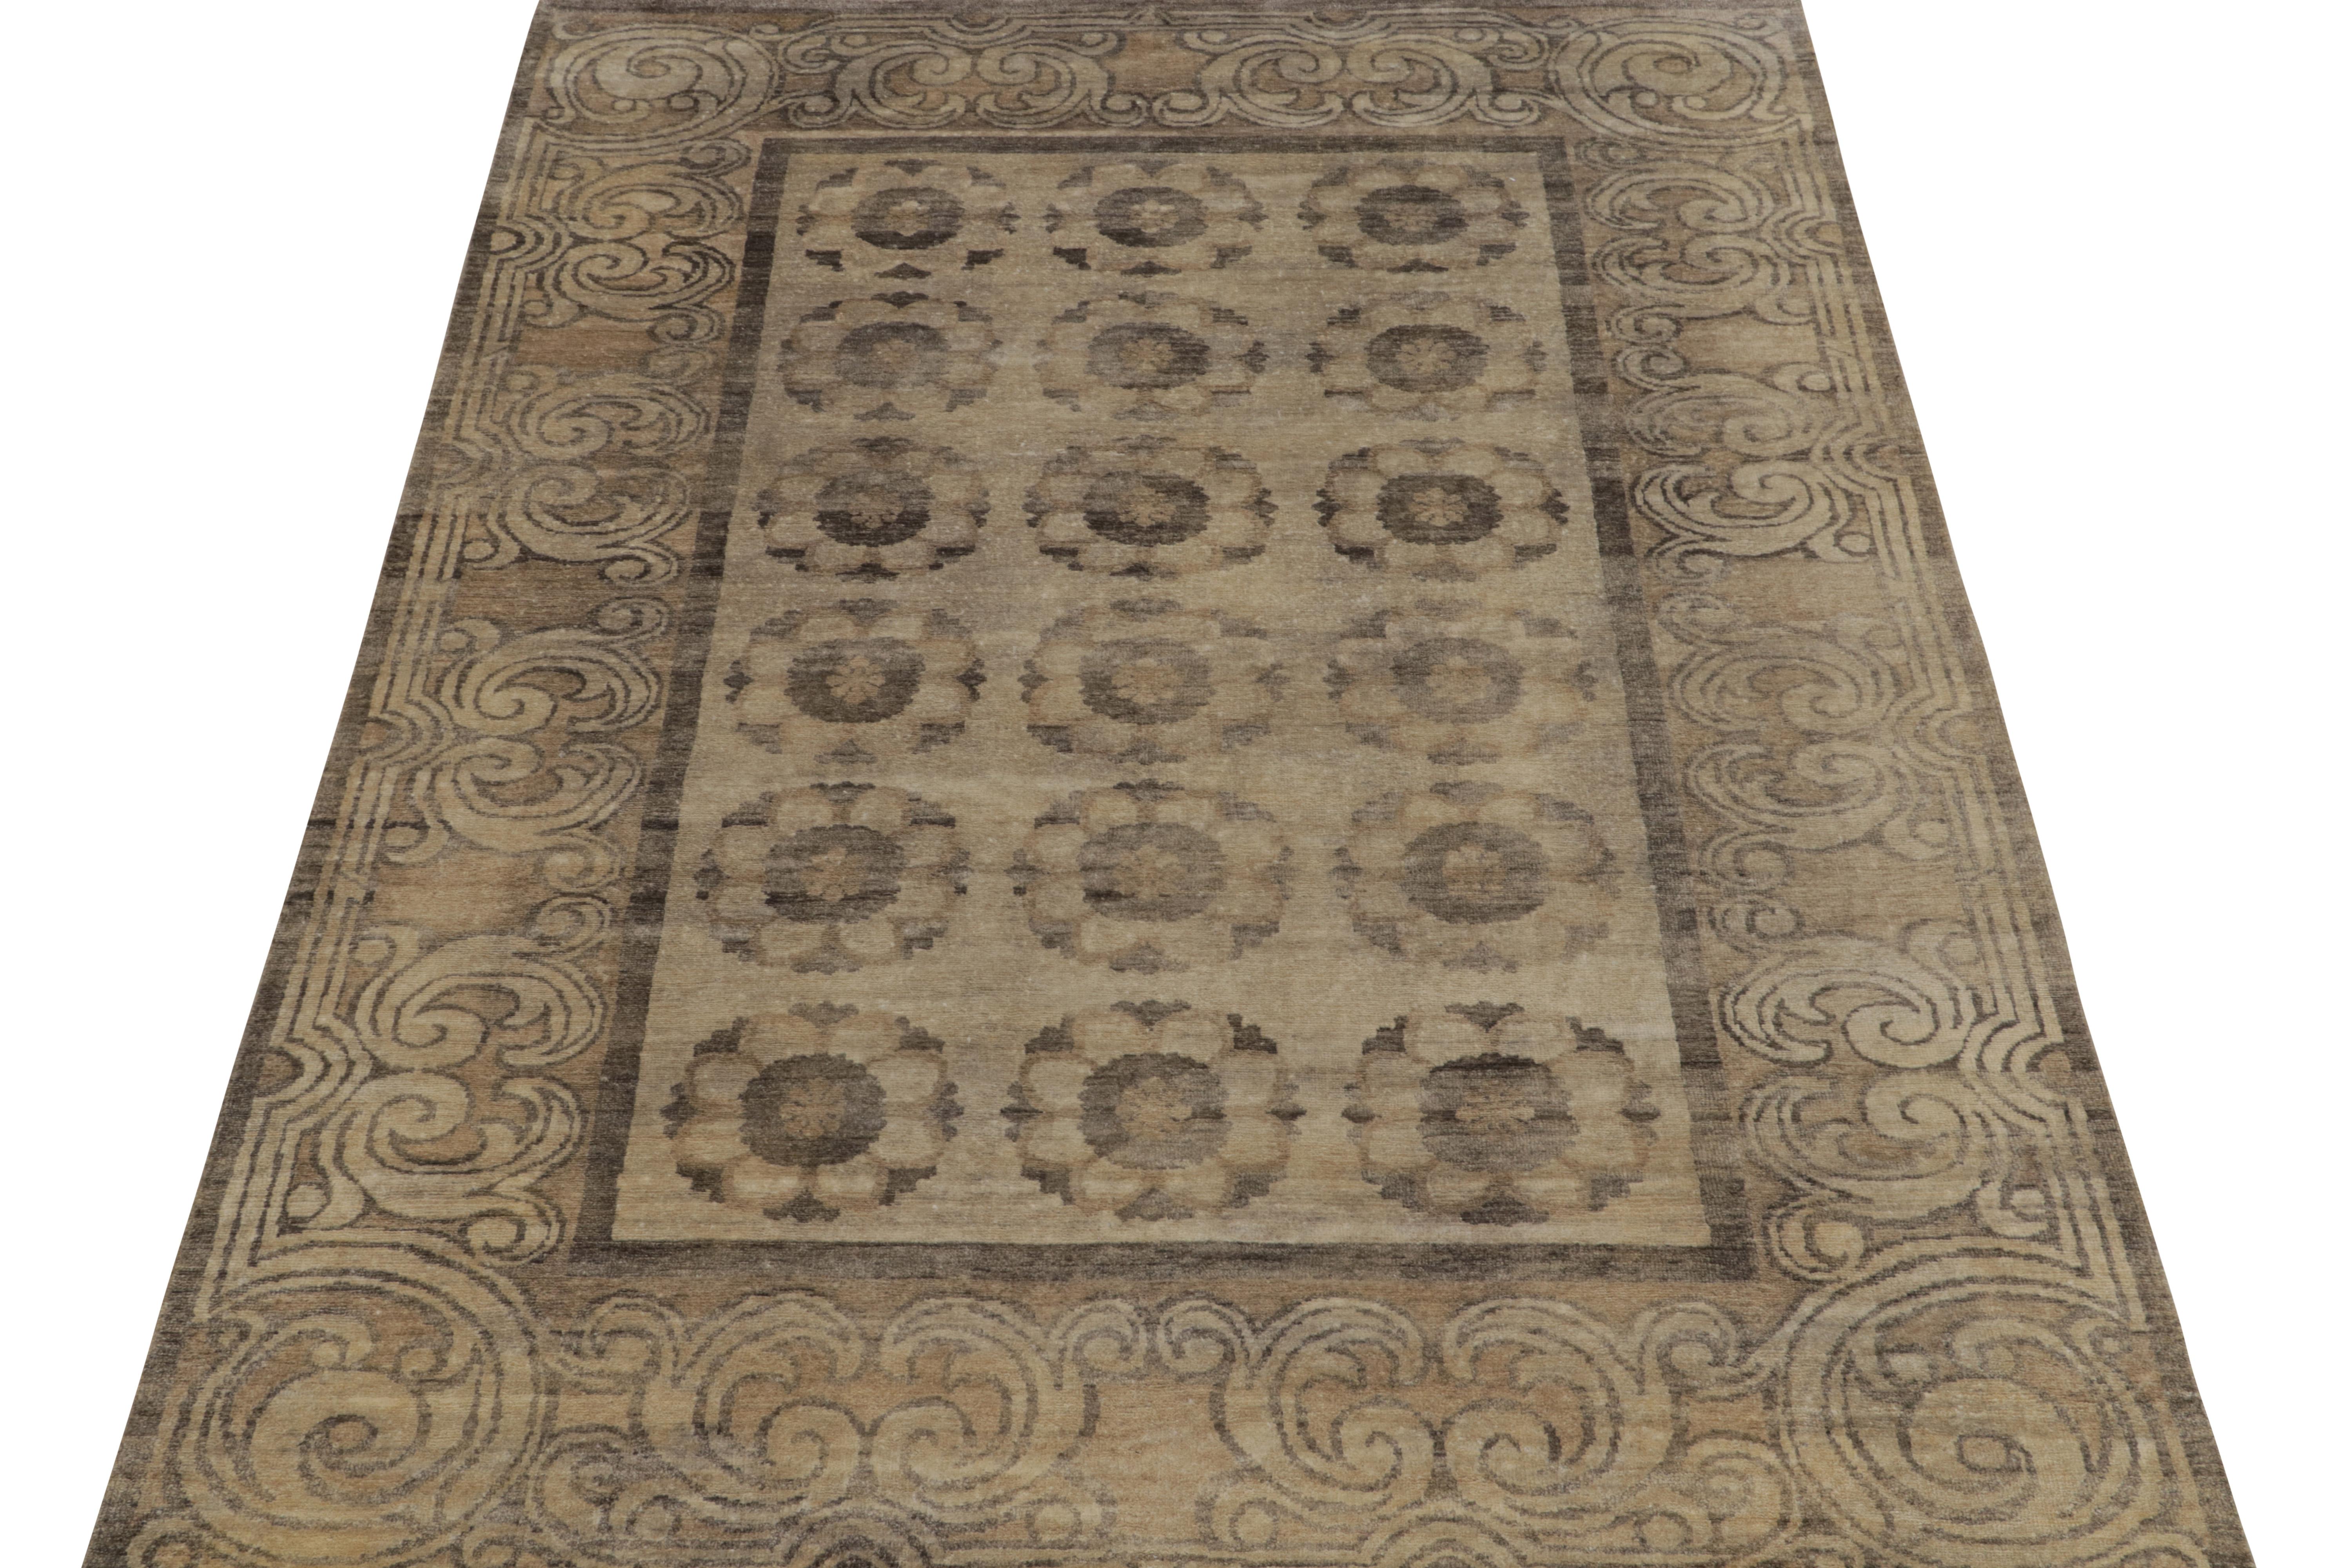 Arts and Crafts Rug & Kilim’s Arts & Crafts style rug in Beige-Brown Medallion Patterns For Sale